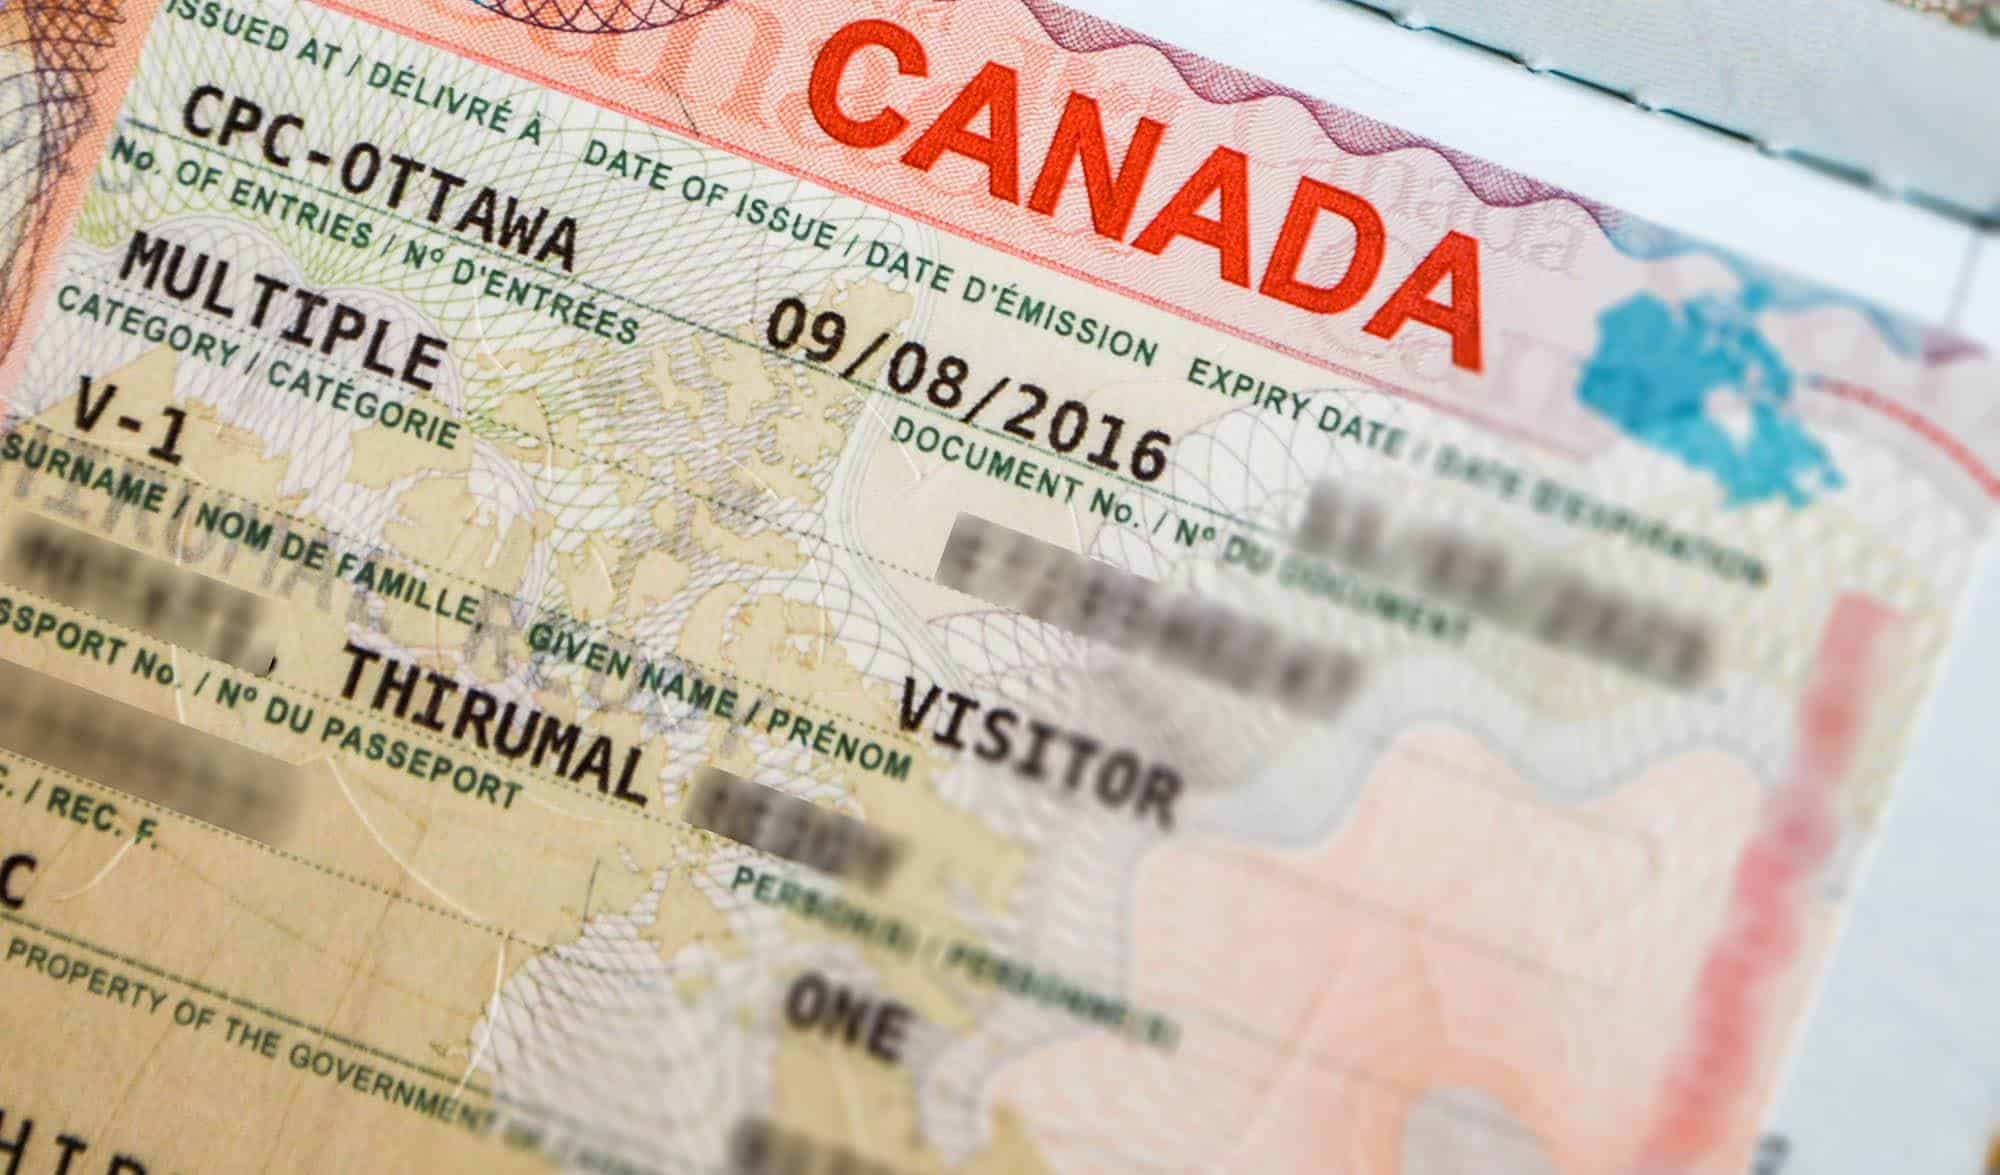 Are you looking to obtain a visa to visit, work, or study in Canada?